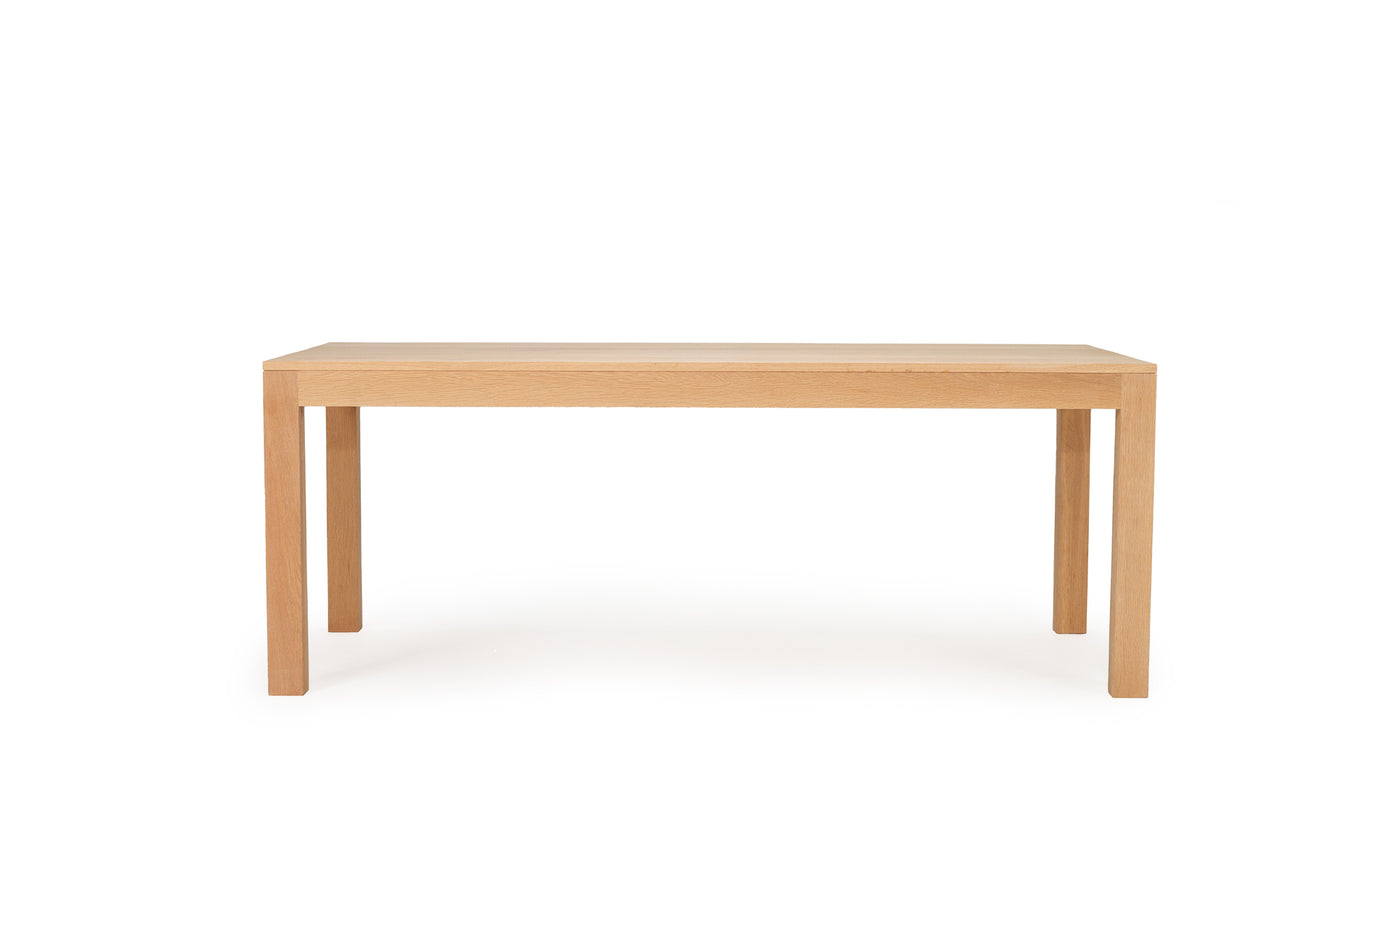 Lexi Dining Table - 2m